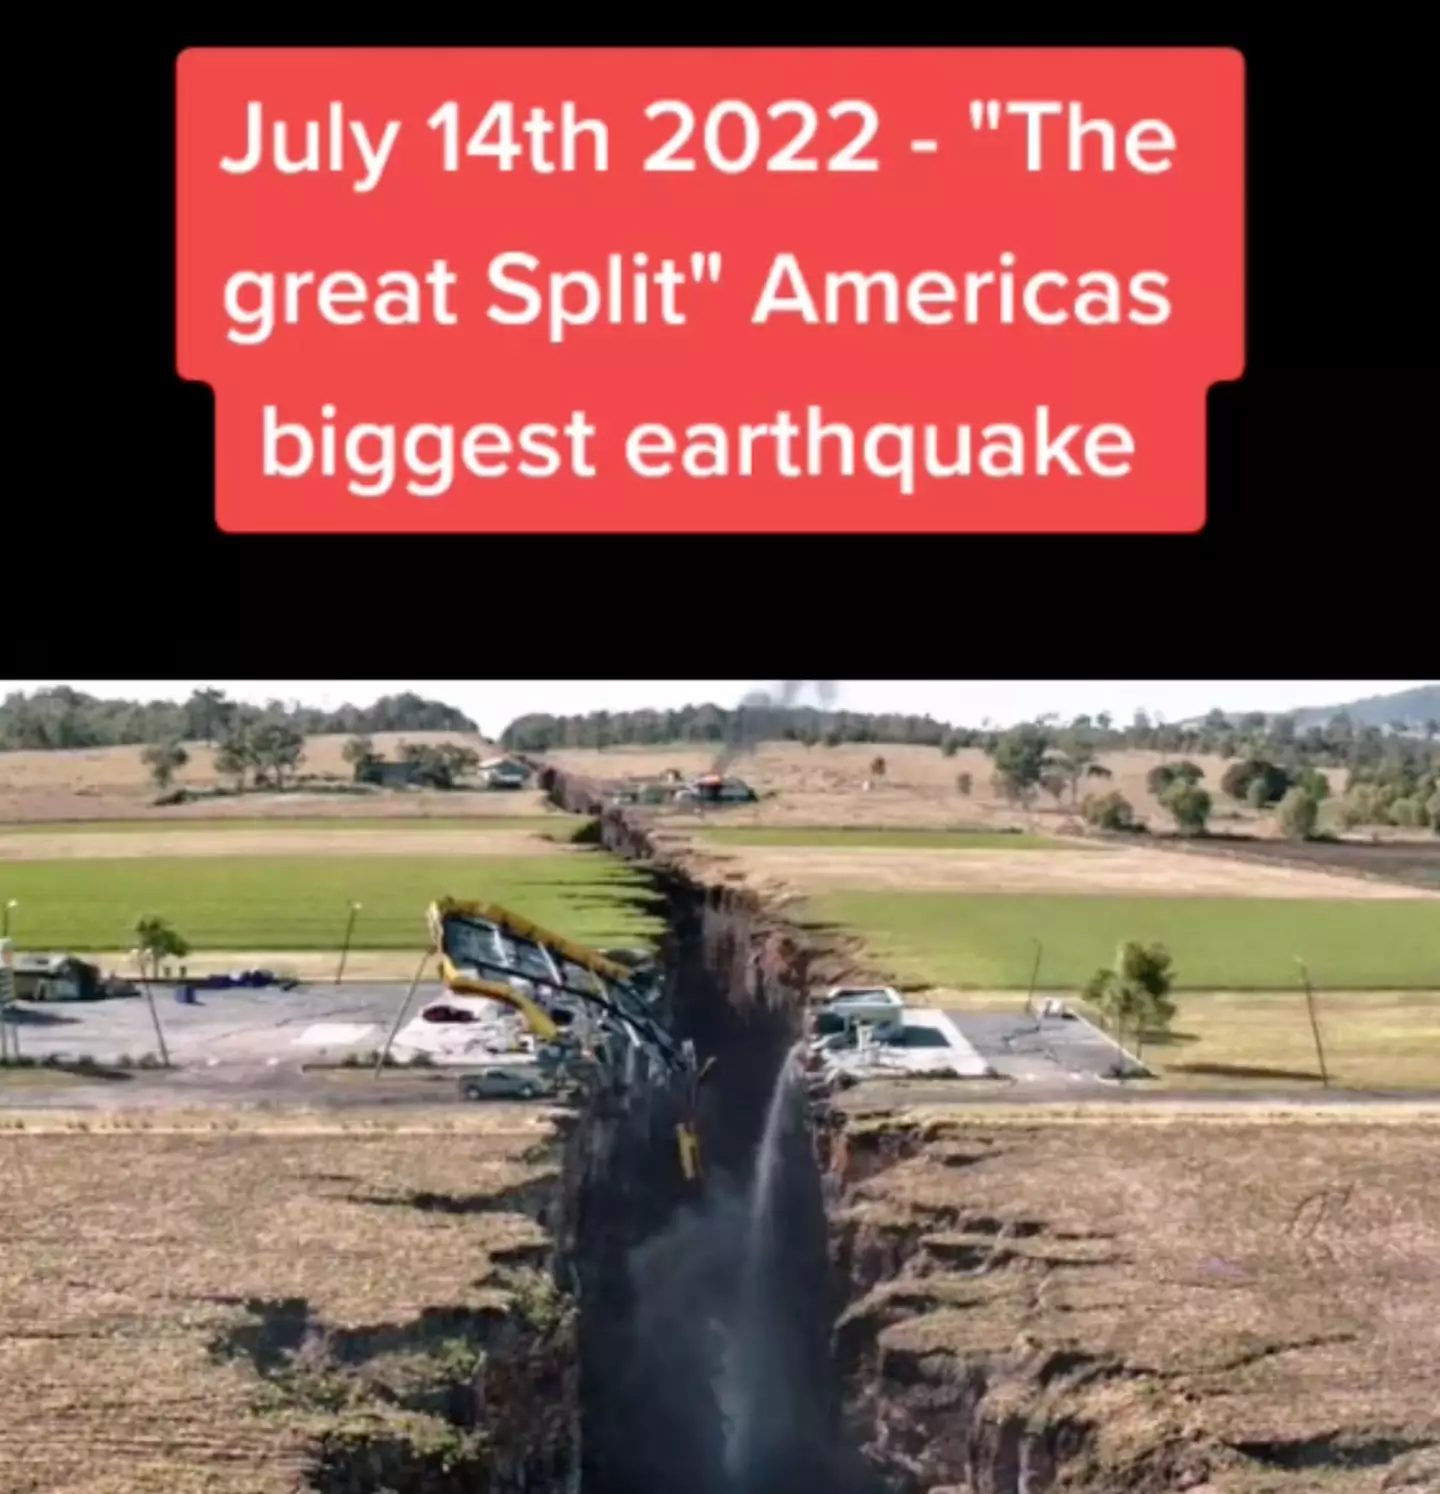 Apparently the world is going to split open in 2022.